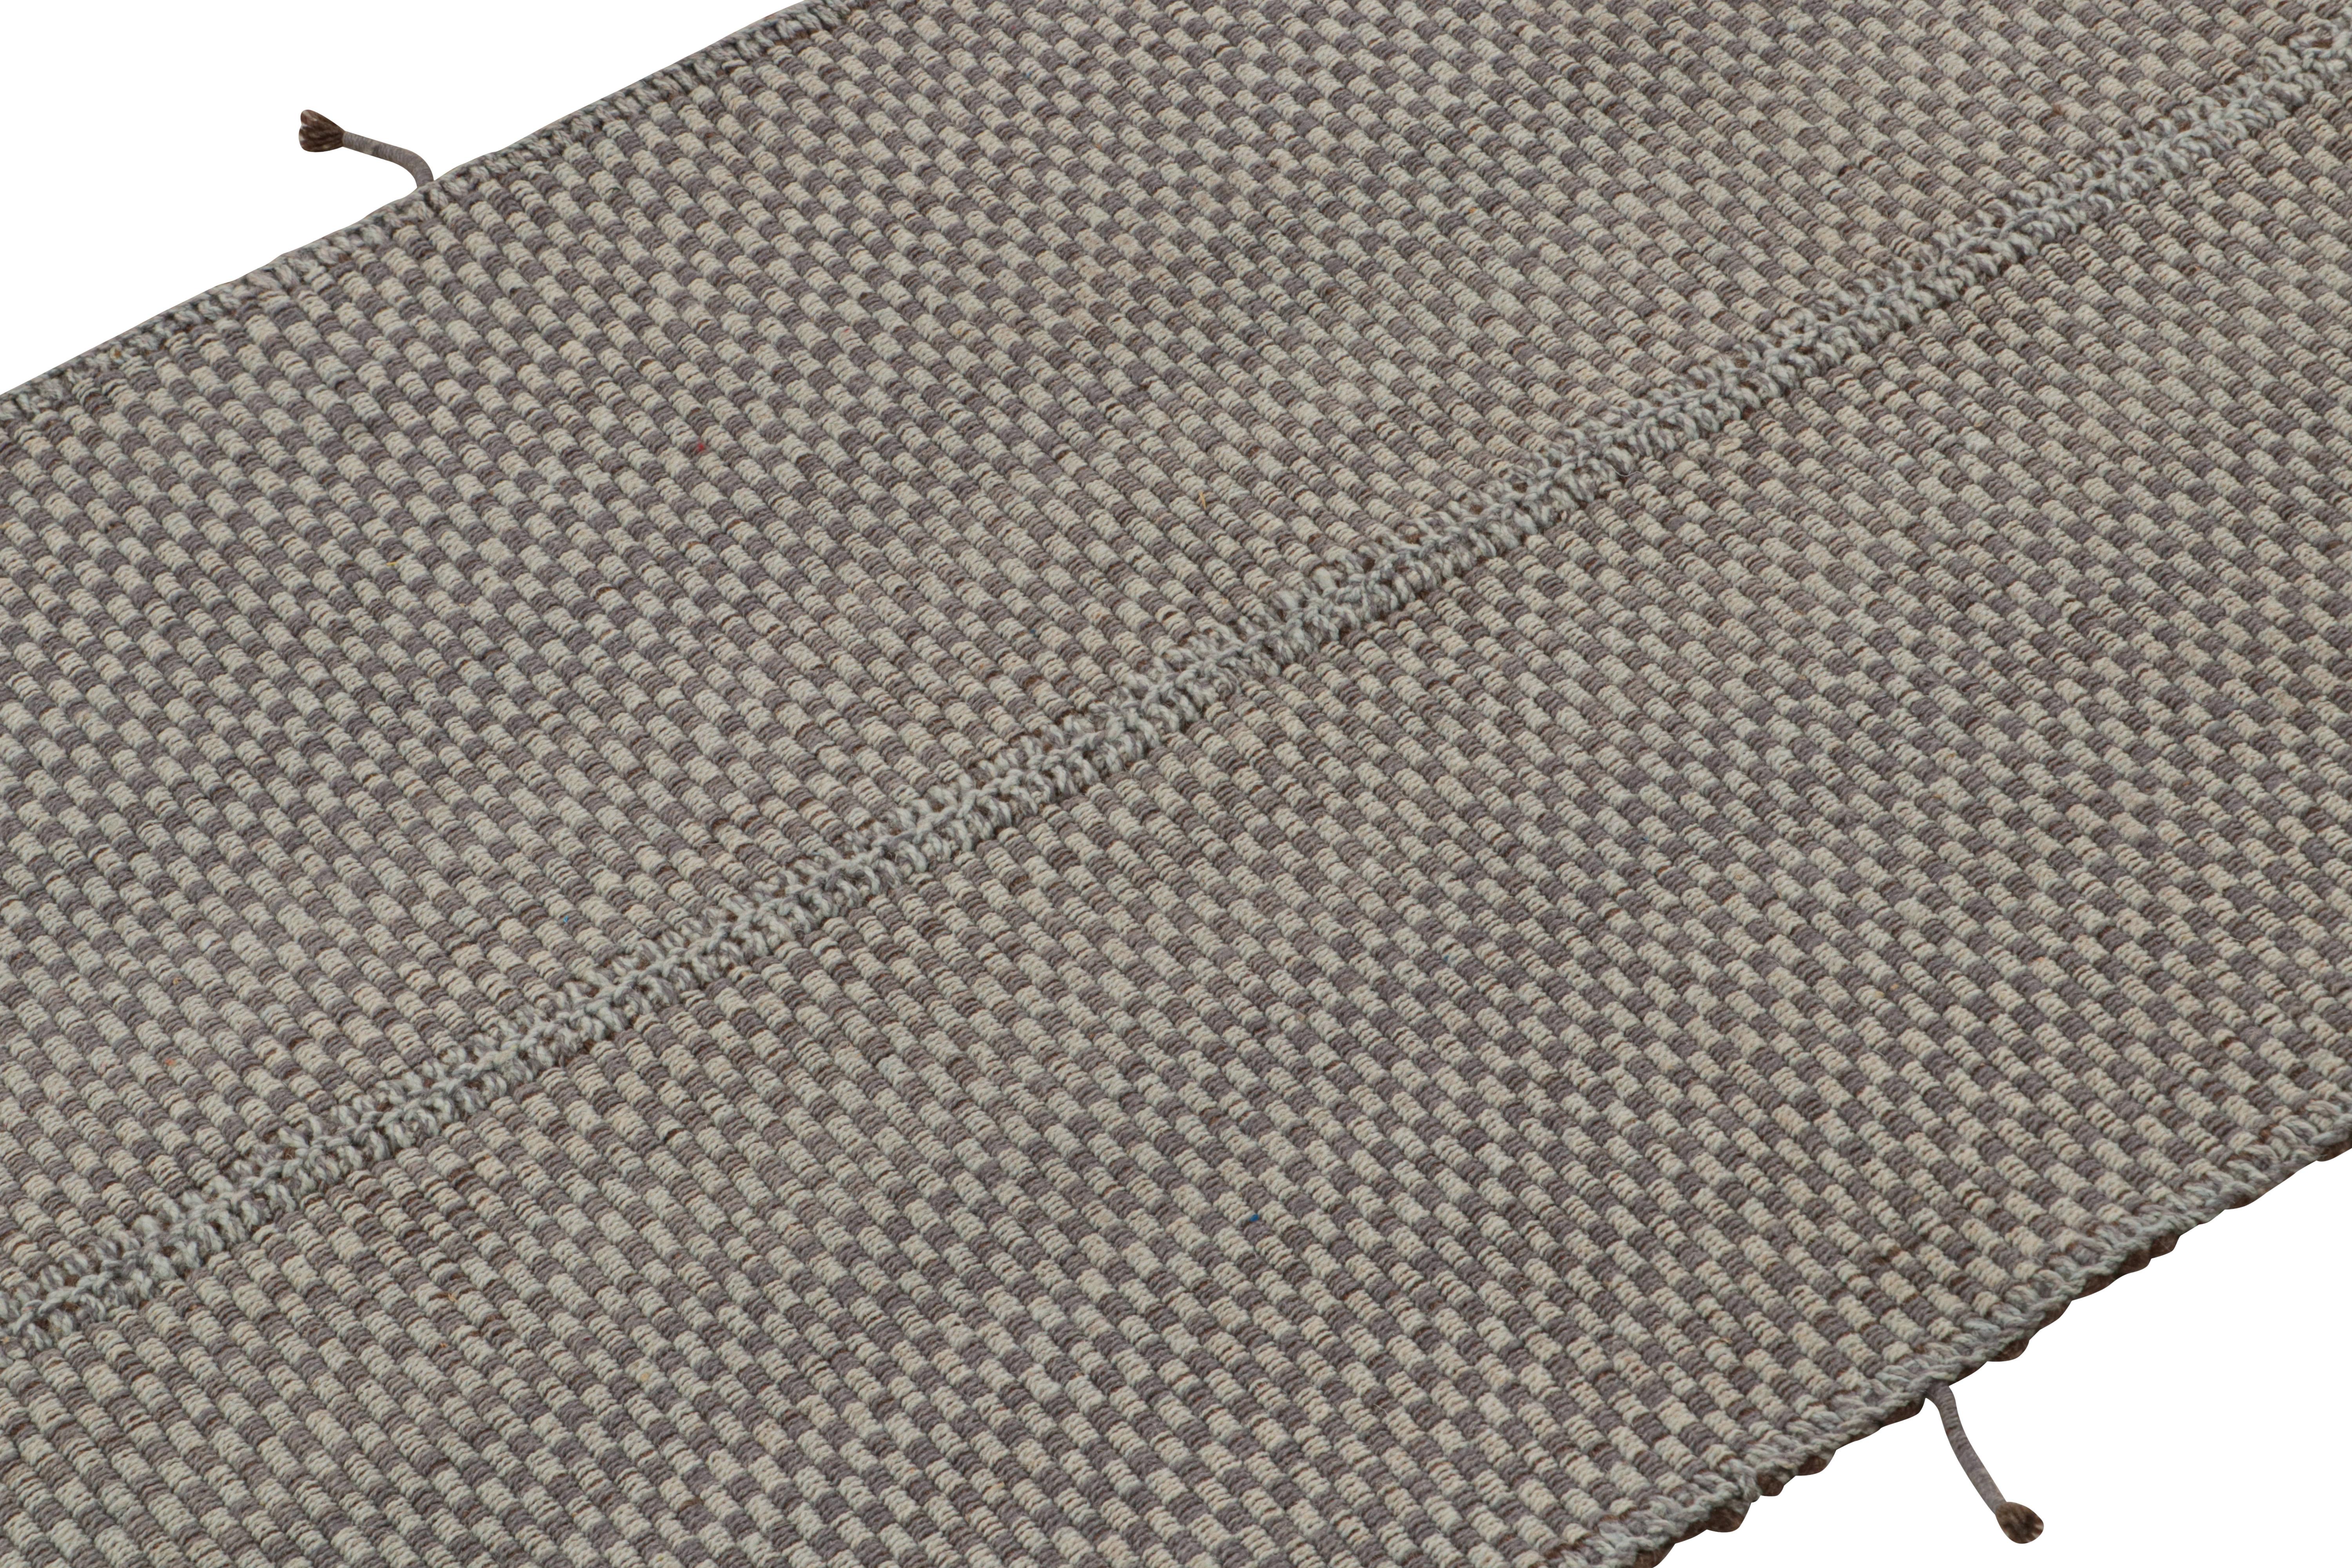 Handwoven in wool, a 3x6 Kilim design from an inventive new contemporary flat weave collection by Rug & Kilim.

On the Design: 

Fondly dubbed, “Rez Kilims”, this modern take on Classic panel-weaving enjoys a fabulous, unique play of gray with